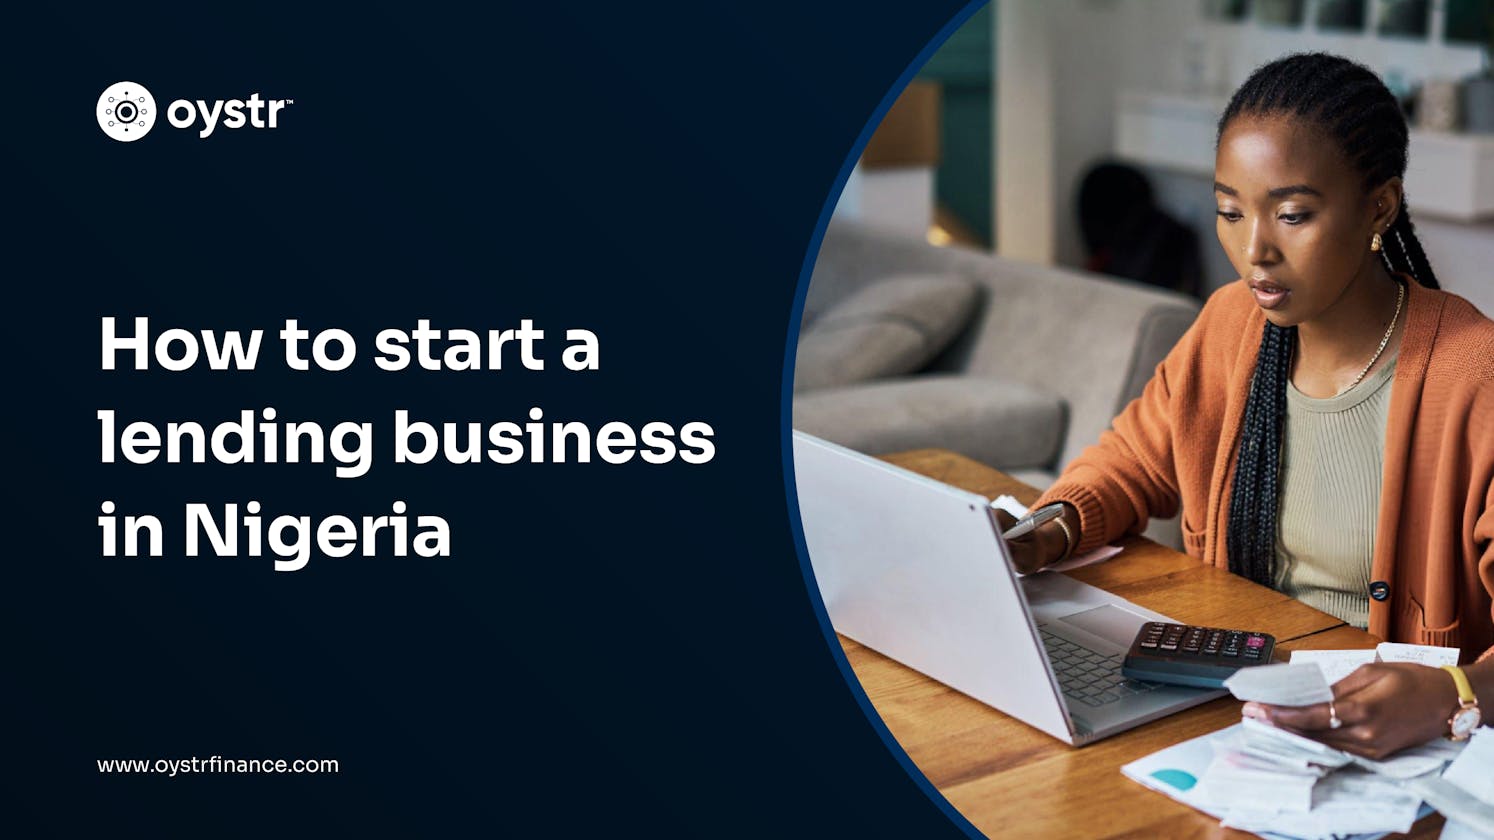 How to start a lending business in Nigeria